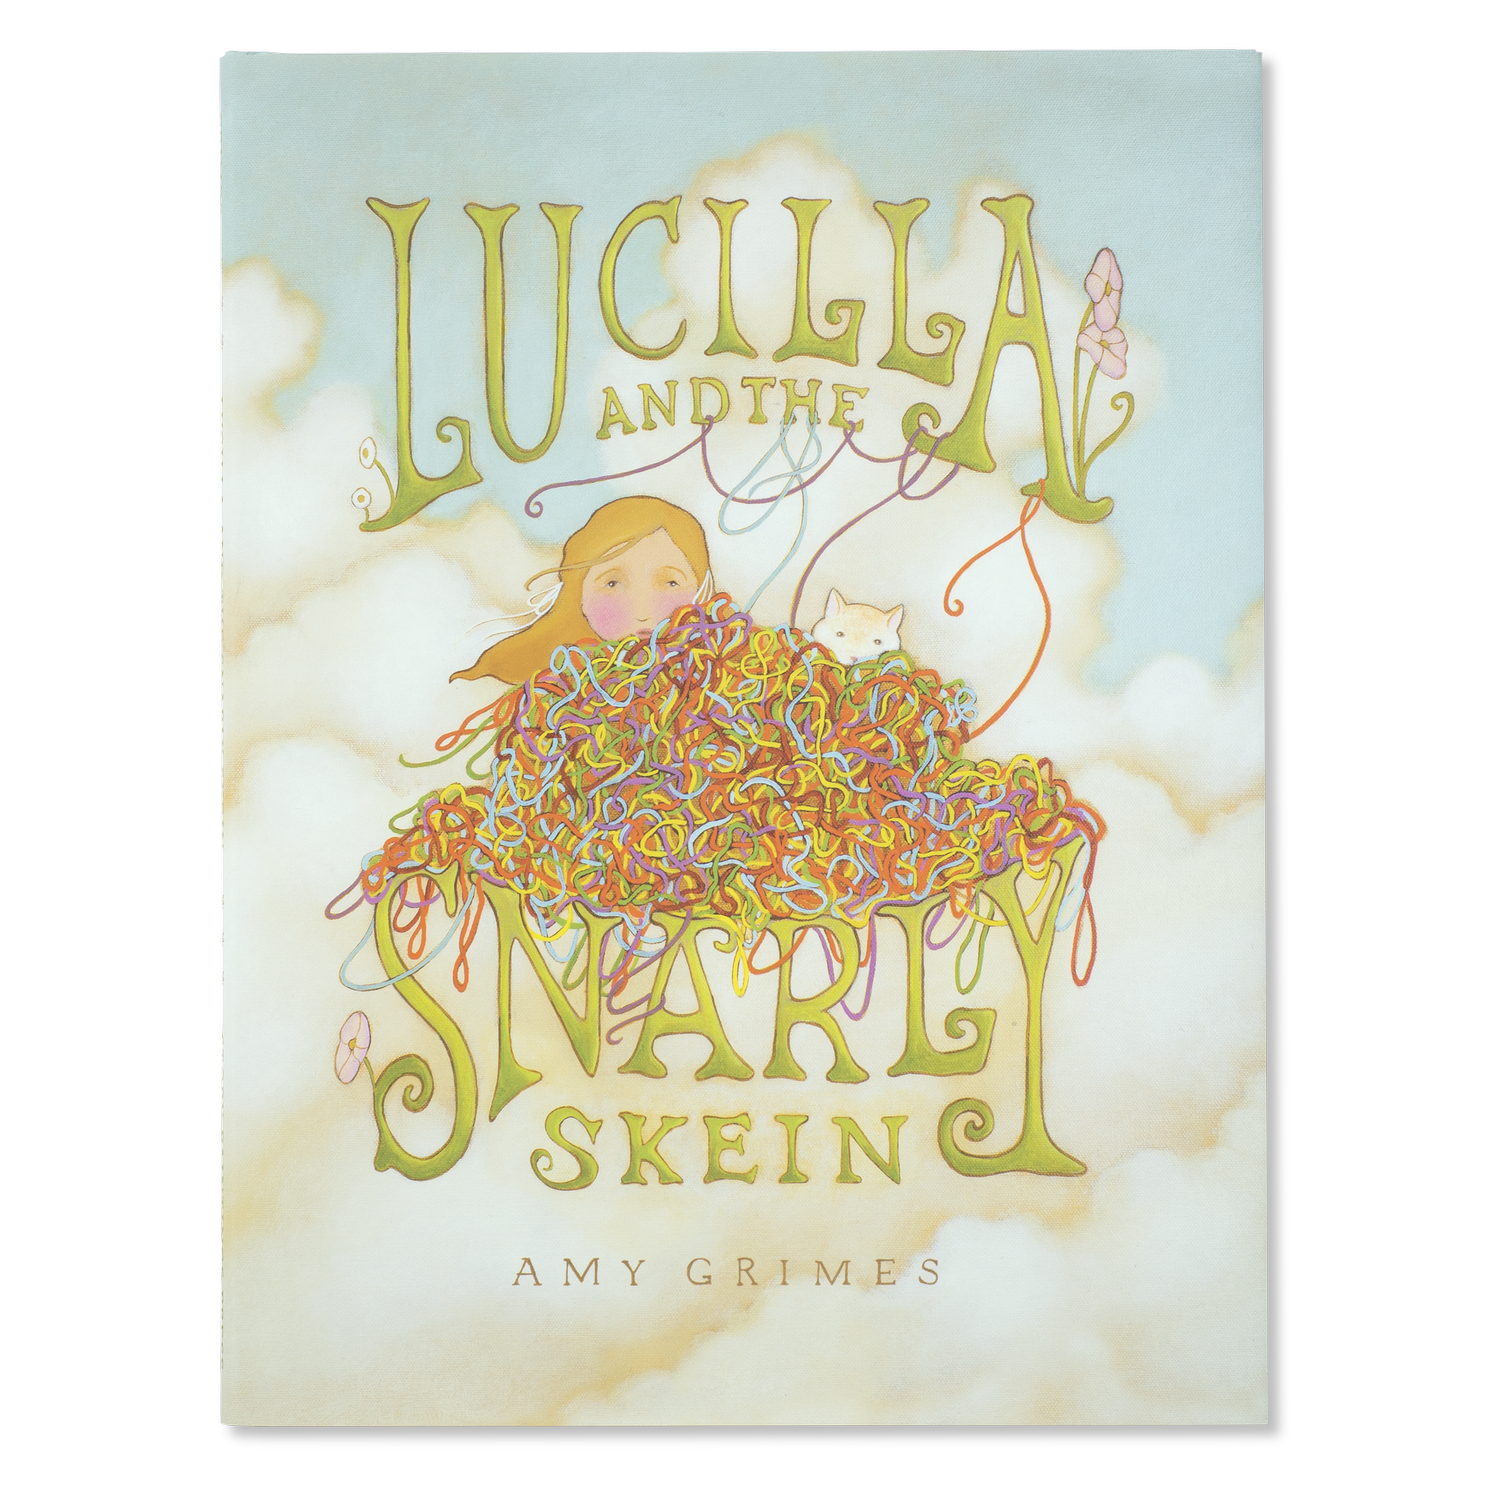 Lucilla and the Snarly Skein - Four Seasons Gallery